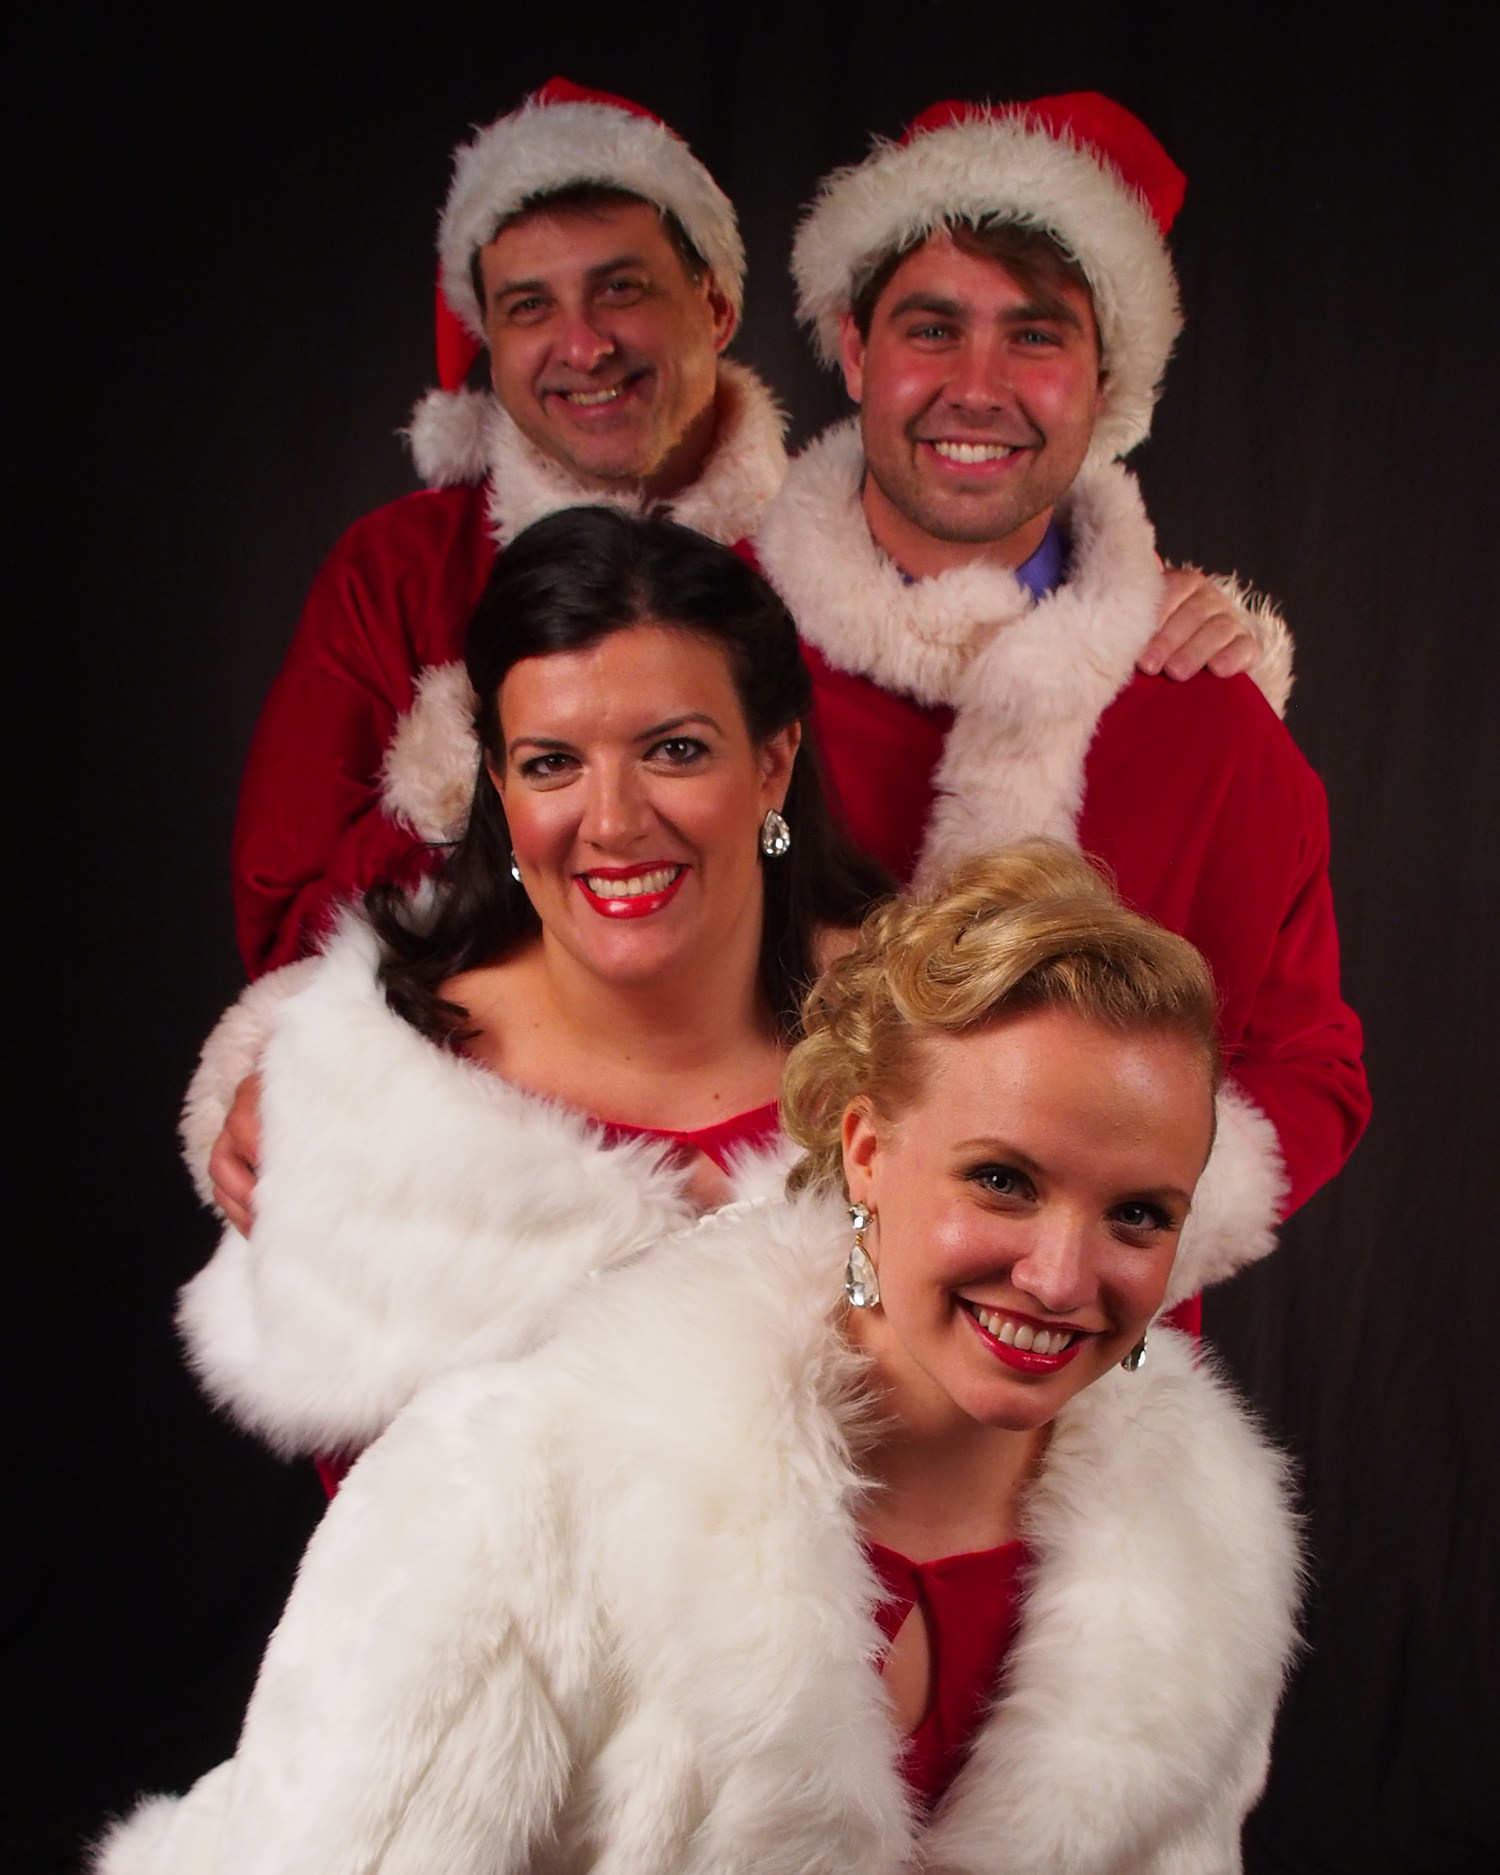 Golden Age Holiday, photo by Dale Pegg:
From top, Tom Pagano of Clinton Township, Robby Mullinger of Grosse Pointe, Danielle Caralis of Birmingham, and Catie Hauff of Richmond are among the nine-member cast in Grosse Pointe Theatre’s “A Golden Age Holiday” benefit performance on Sunday Dec. 16 at The ARK at St. Ambrose, in Grosse Pointe Park. The fundraiser will also include an exciting silent auction and raffle. Proceeds from the gala will support Grosse Pointe Theatre's performing arts program. Seating is limited. To reserve tickets, visit www.gpt.org or call 313-881-4004.
1